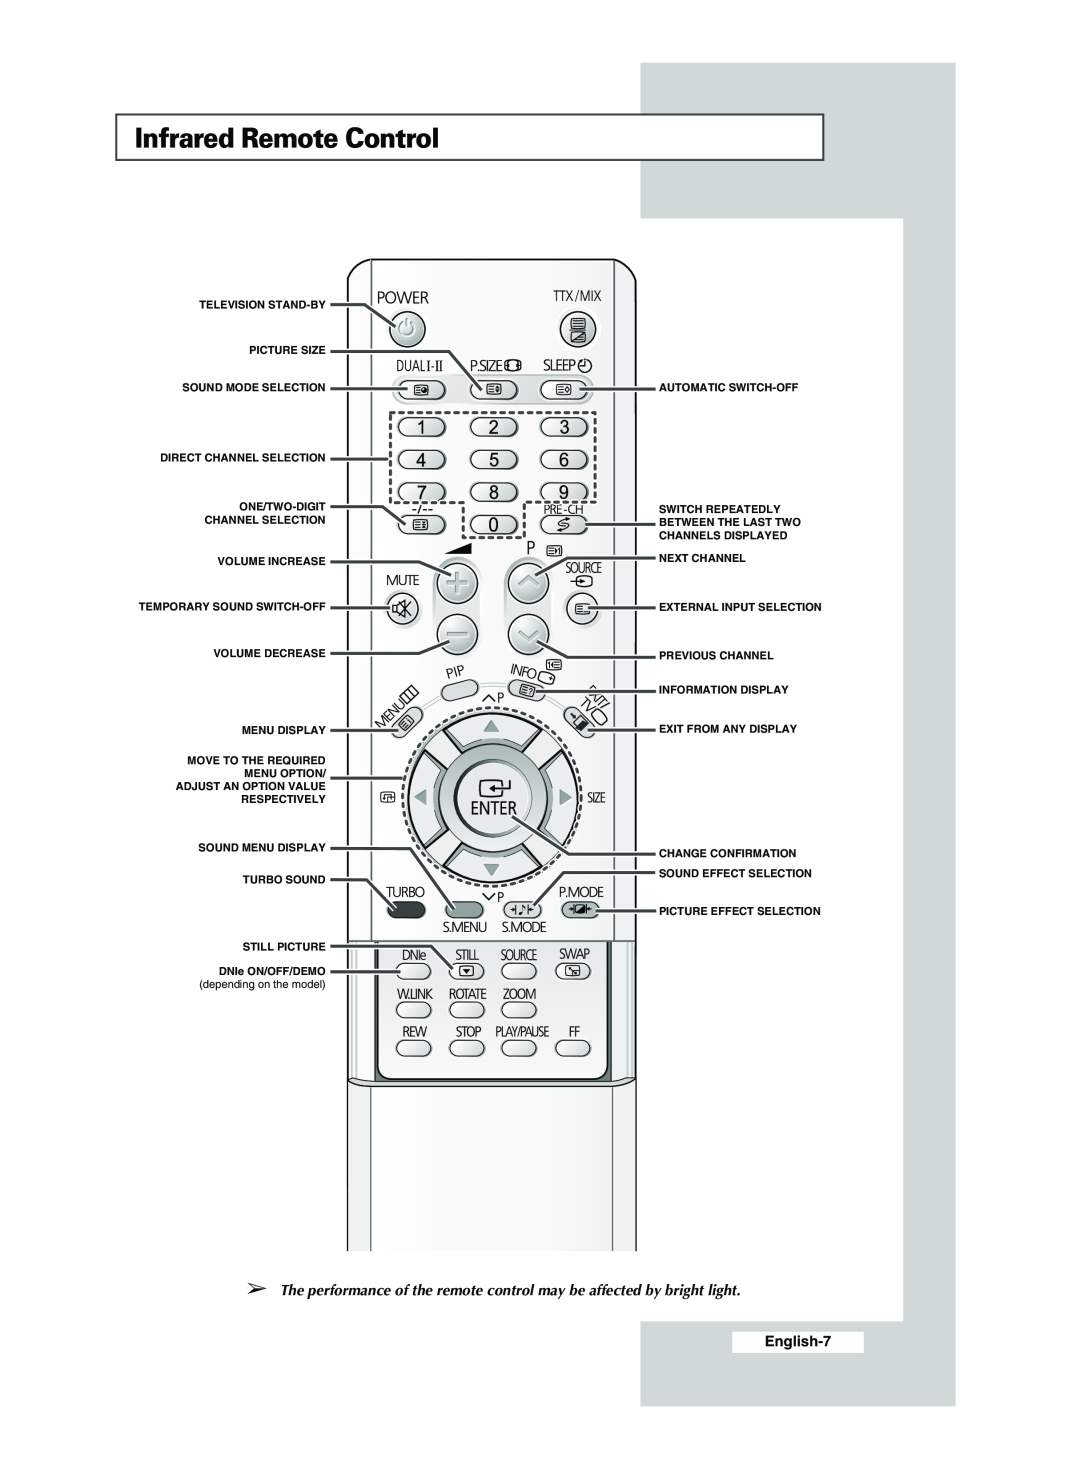 Samsung CS29M21 Infrared Remote Control, The performance of the remote control may be affected by bright light, English-7 